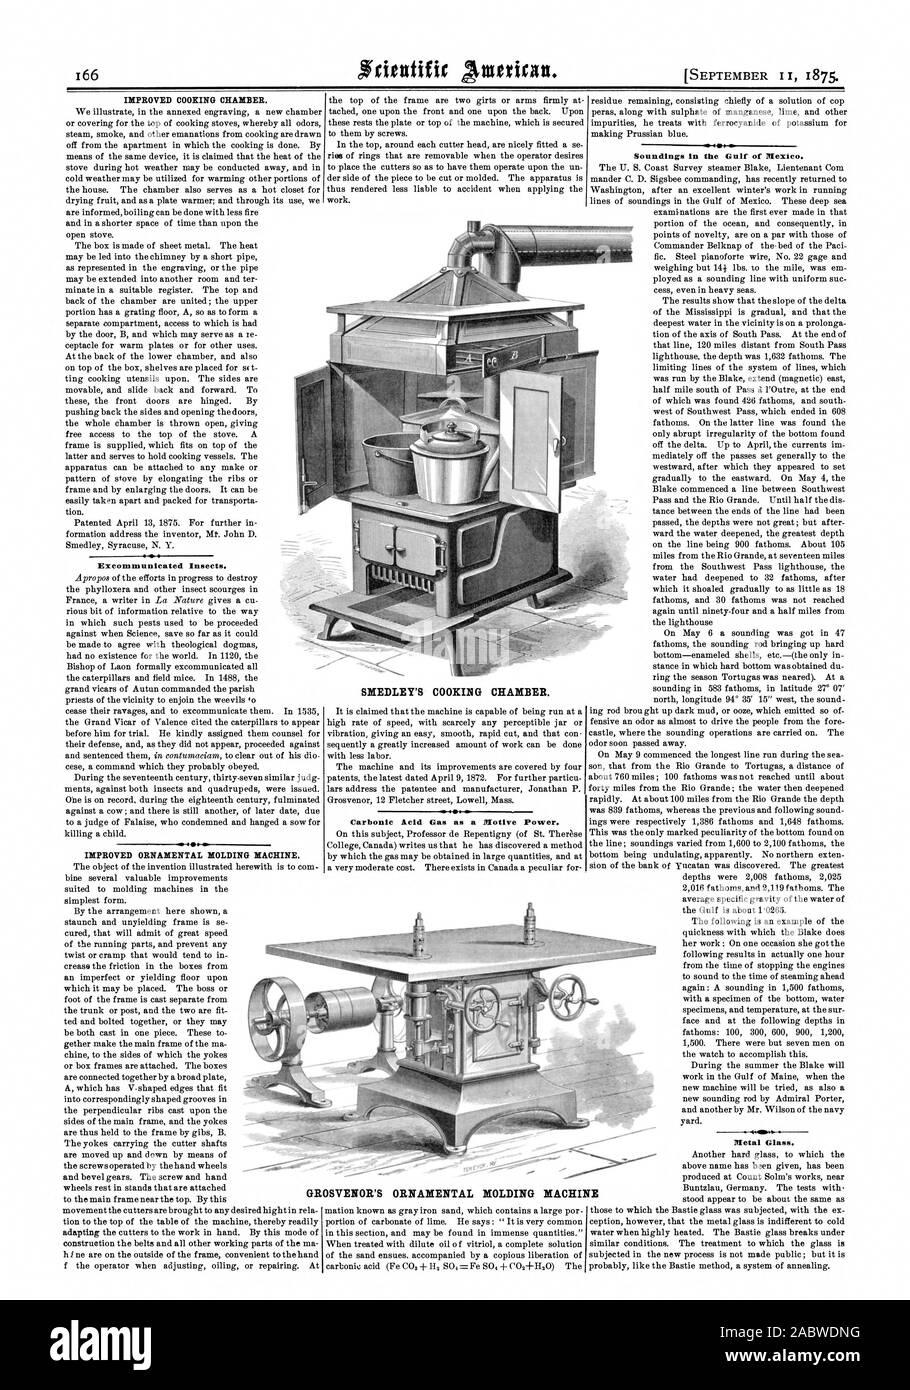 GROSVENOR'S ORNAMENTAL MOLDING MACHINE IMPROVED COOKING CHAMBER. Excommunicated Insects. IMPROVED ORNAMENTAL MOLDING MACHINE. Carbonic &cid Gas as a Motive Power. Soundings in the Gulf of Mexico.  4 41s Metal Glass. SMEDLEY'S COOKING CHAMBER., scientific american, 75-09-11 Stock Photo